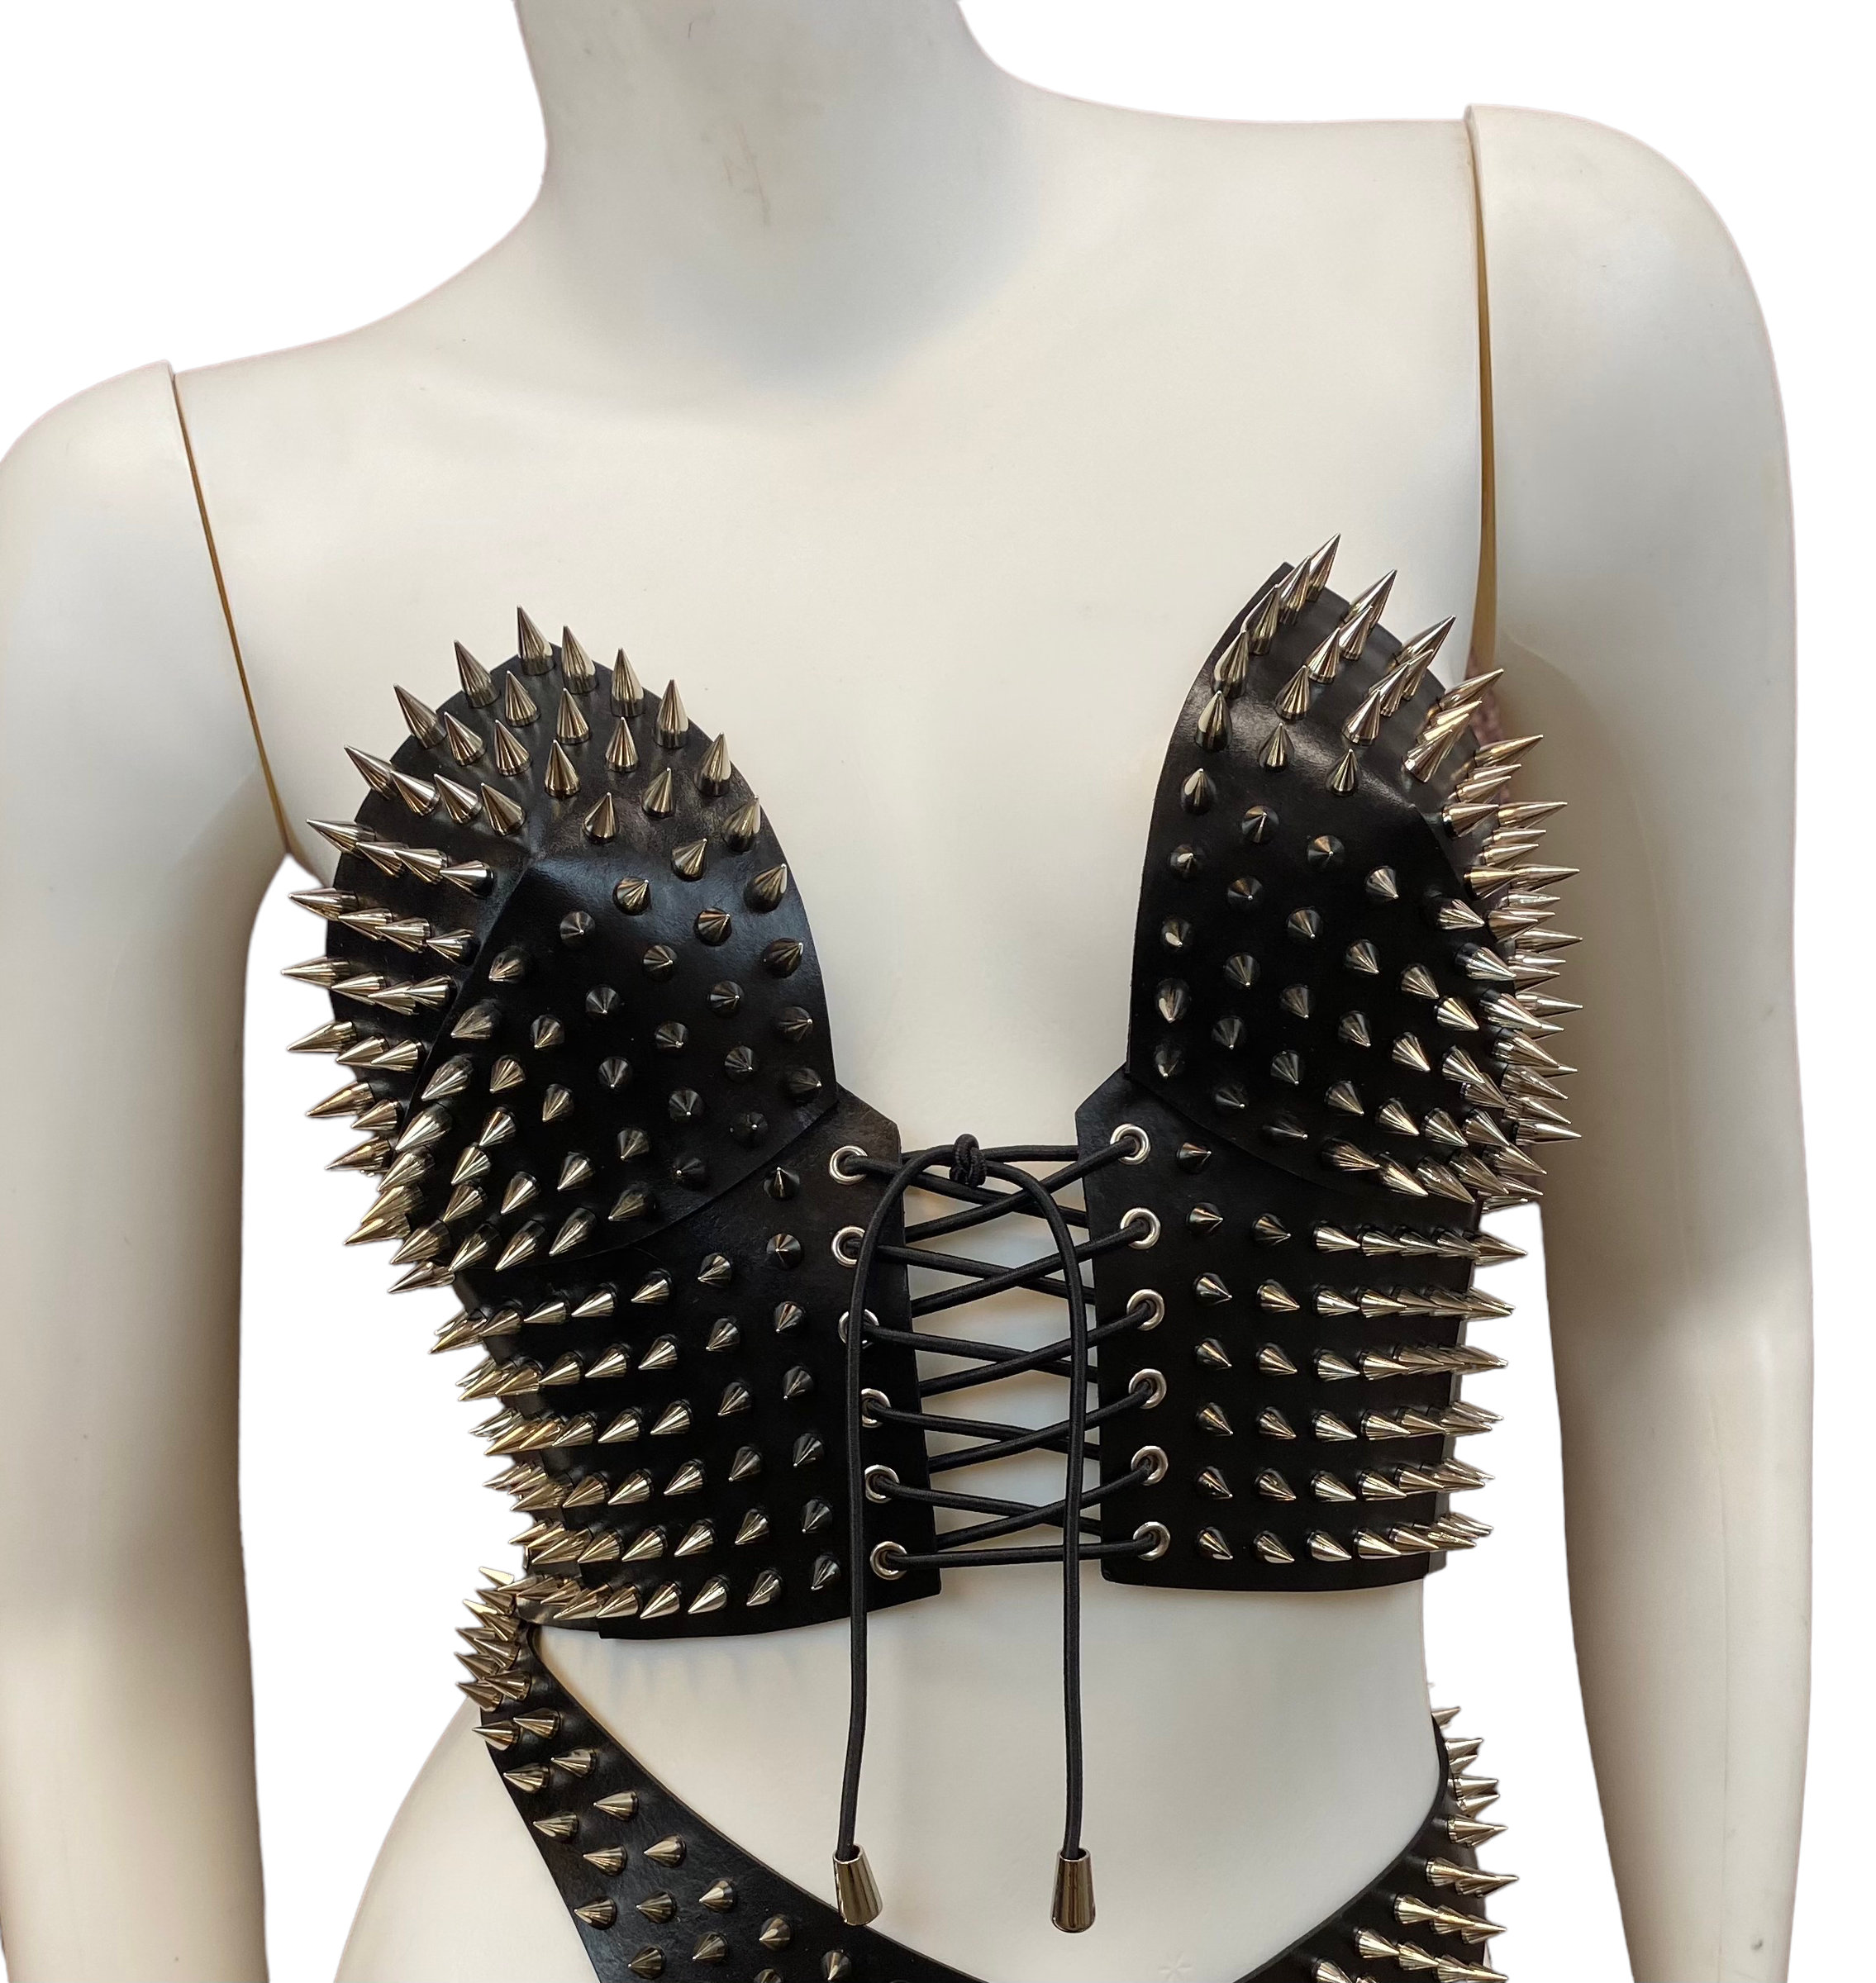 The Lunatic Spiked Bra, Leather Bra With Spikes, Lace-up Bralette